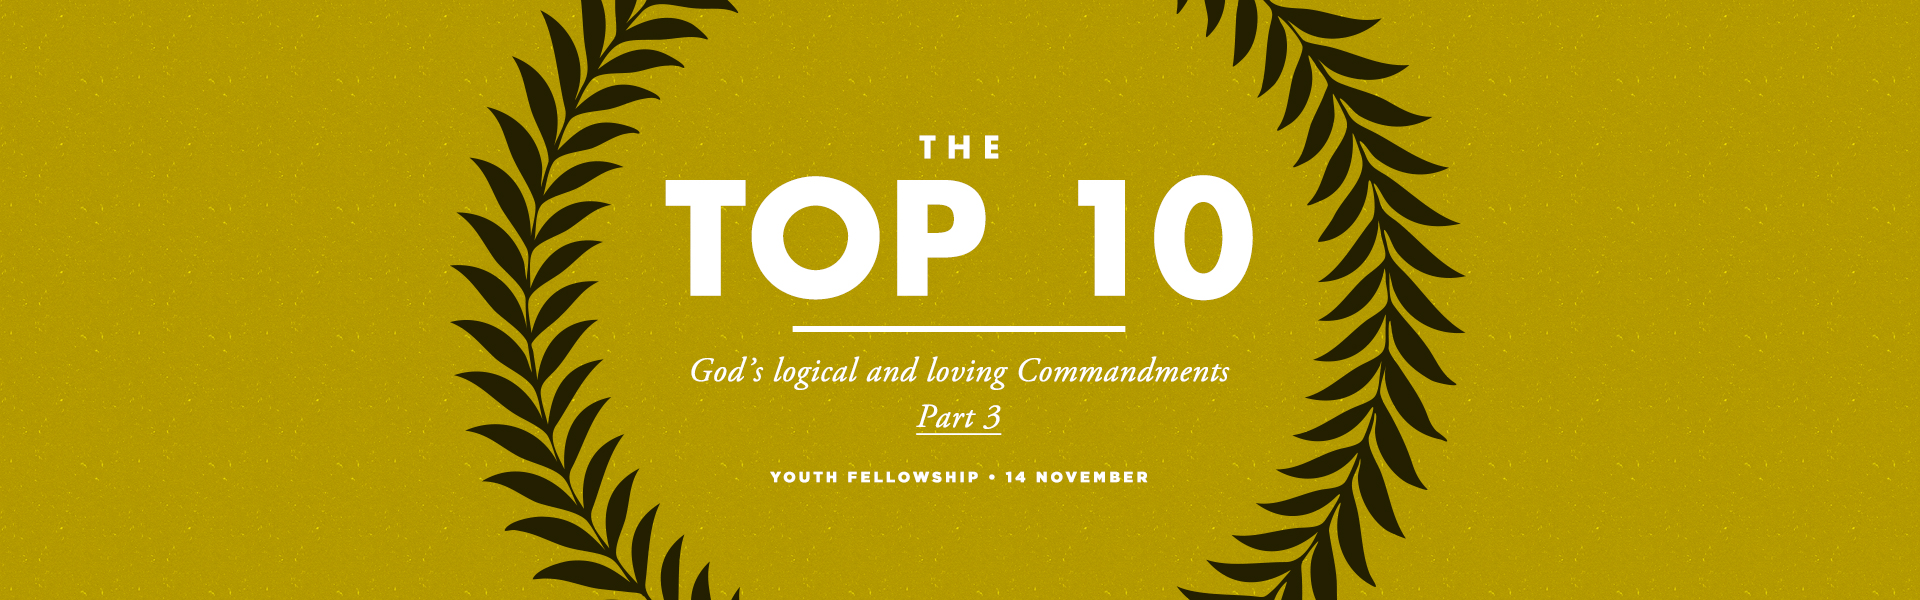 The Top 10 God’s logical and loving Commandments Part 3